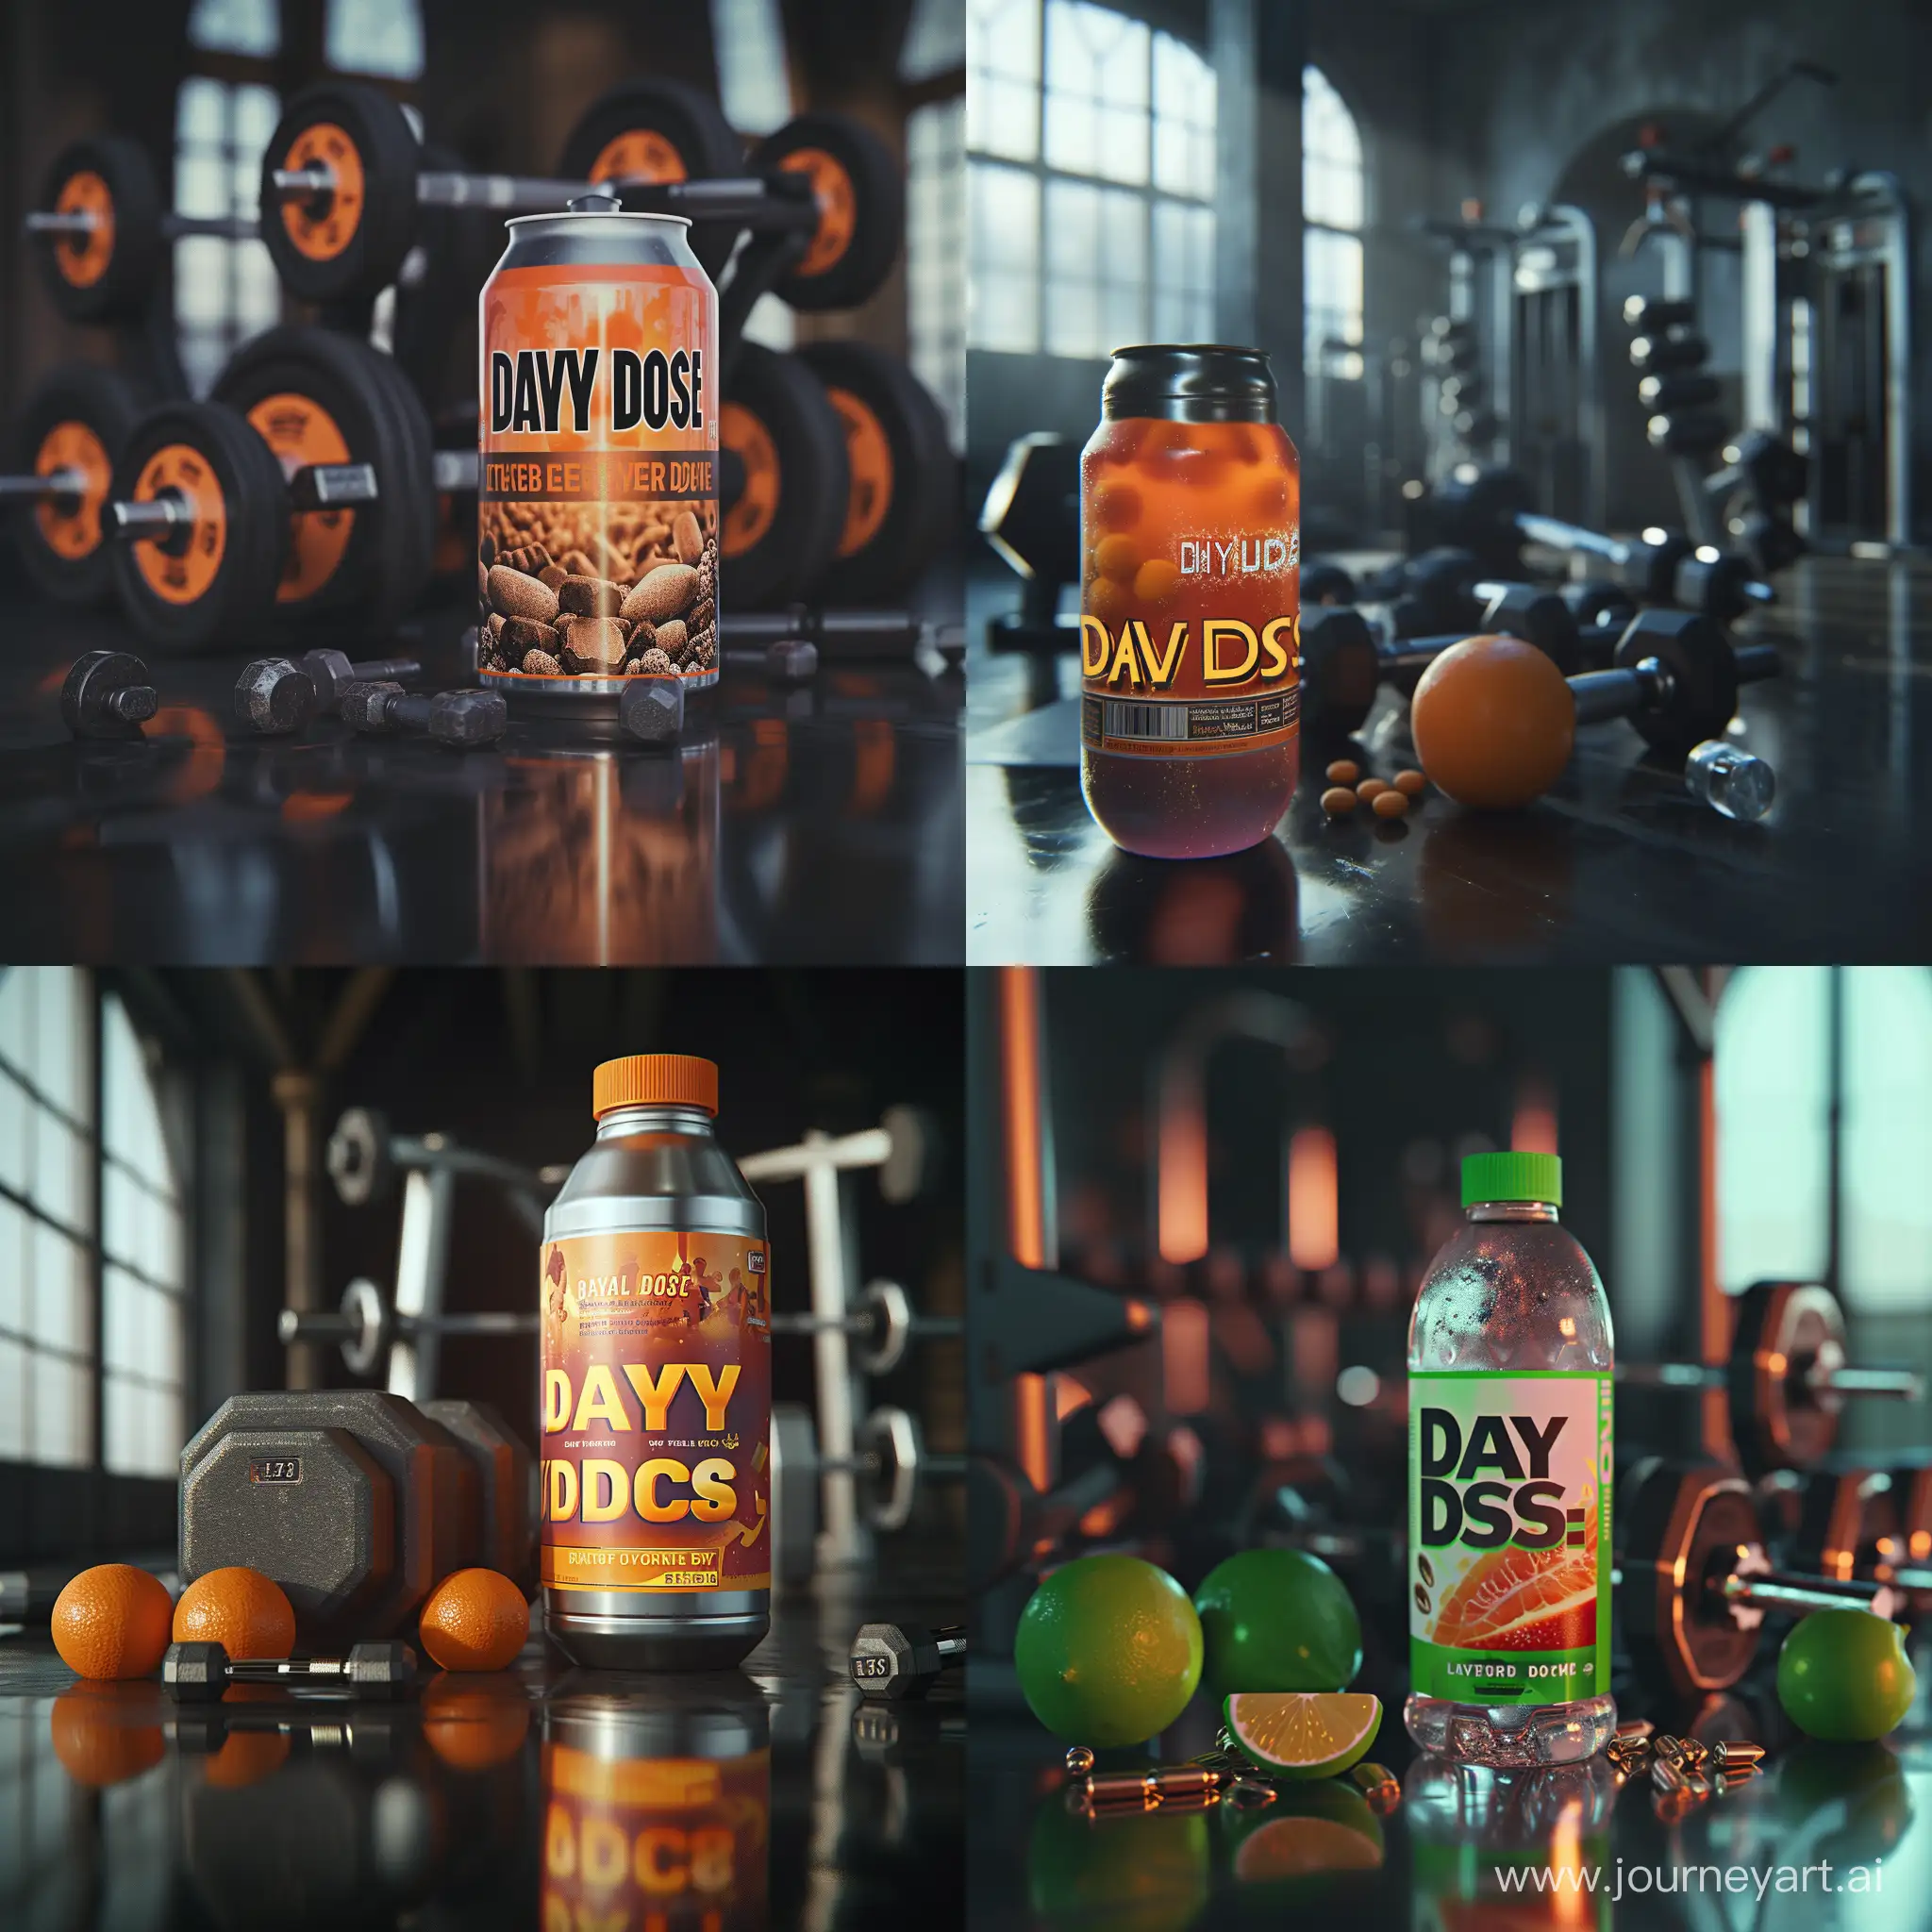 Make an Energydrink named Daily Dose. Have a gym background with dumbells and such and also lable it for heavy duty
